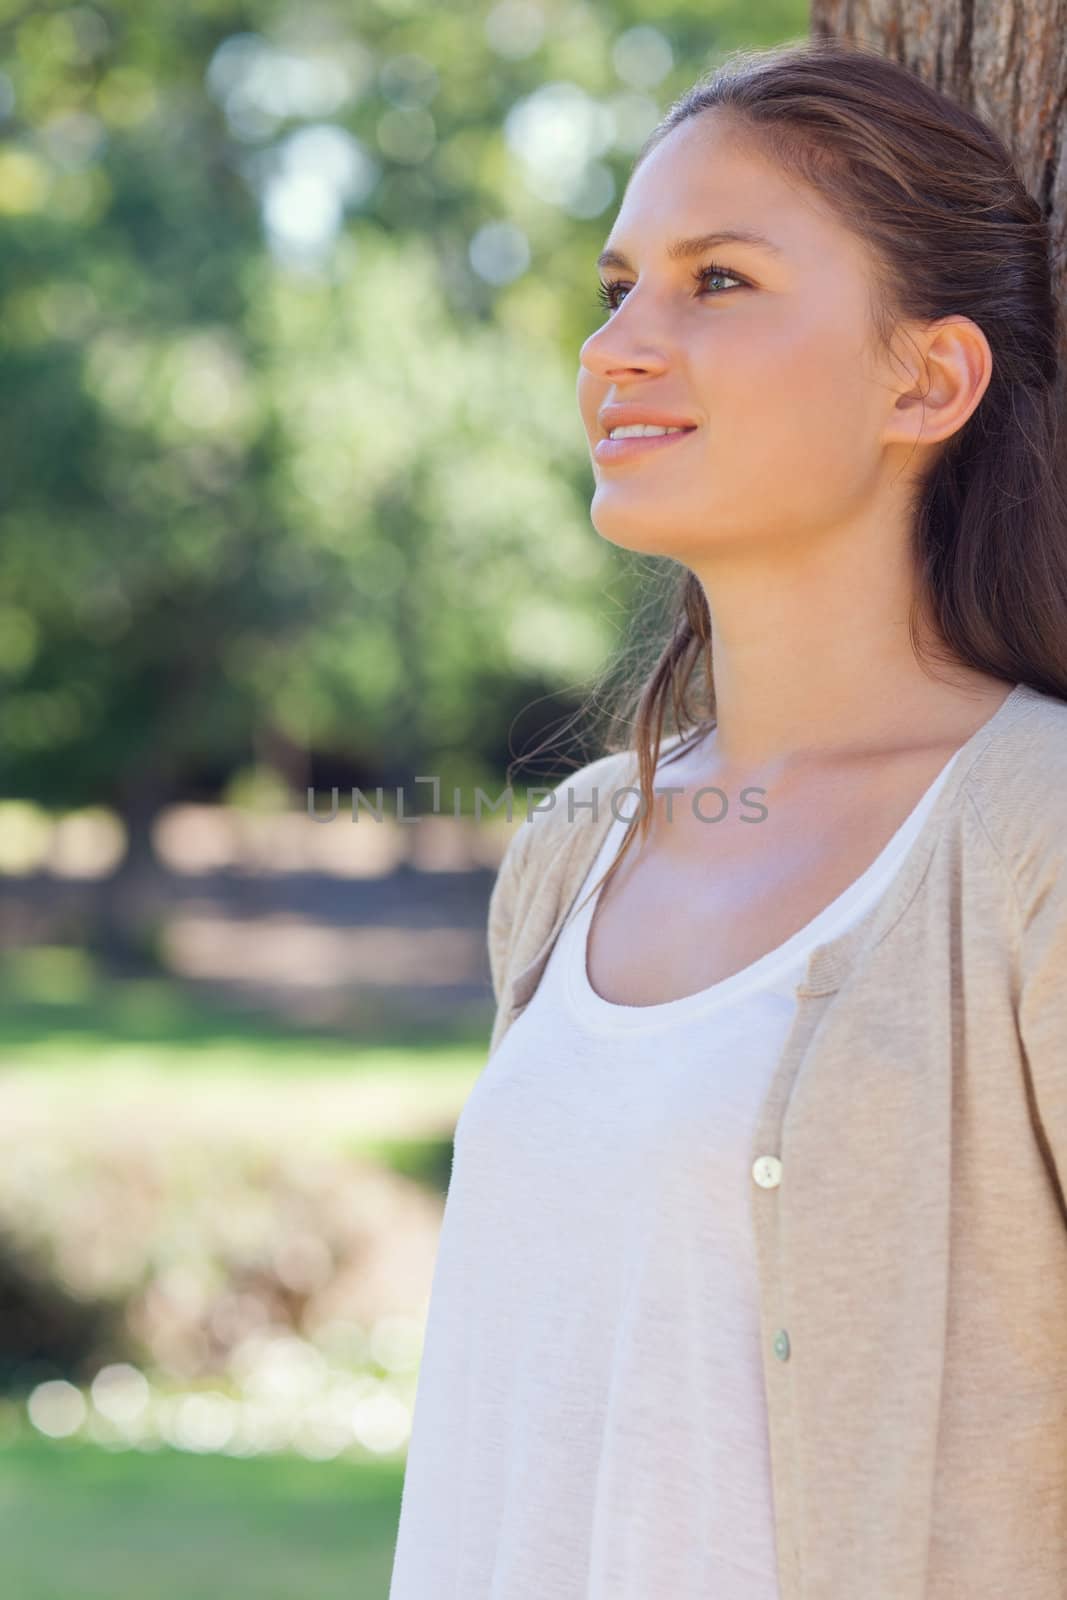 Smiling woman leaning against a tree in the park by Wavebreakmedia